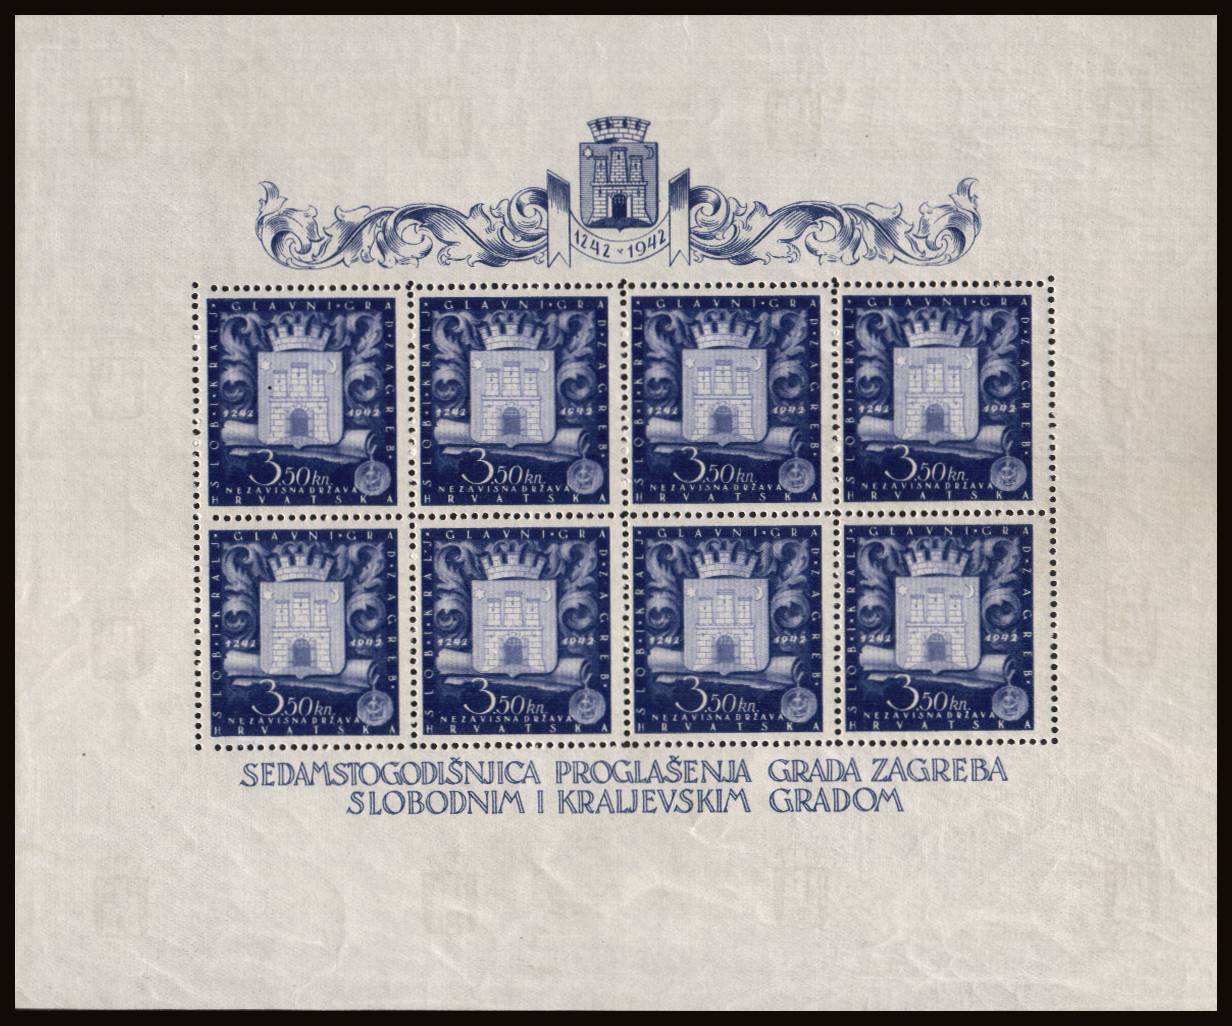 Seventh Centenary of Foundation of Zagreb<br/>
A superb unmounted mint special sheetlet of eight.